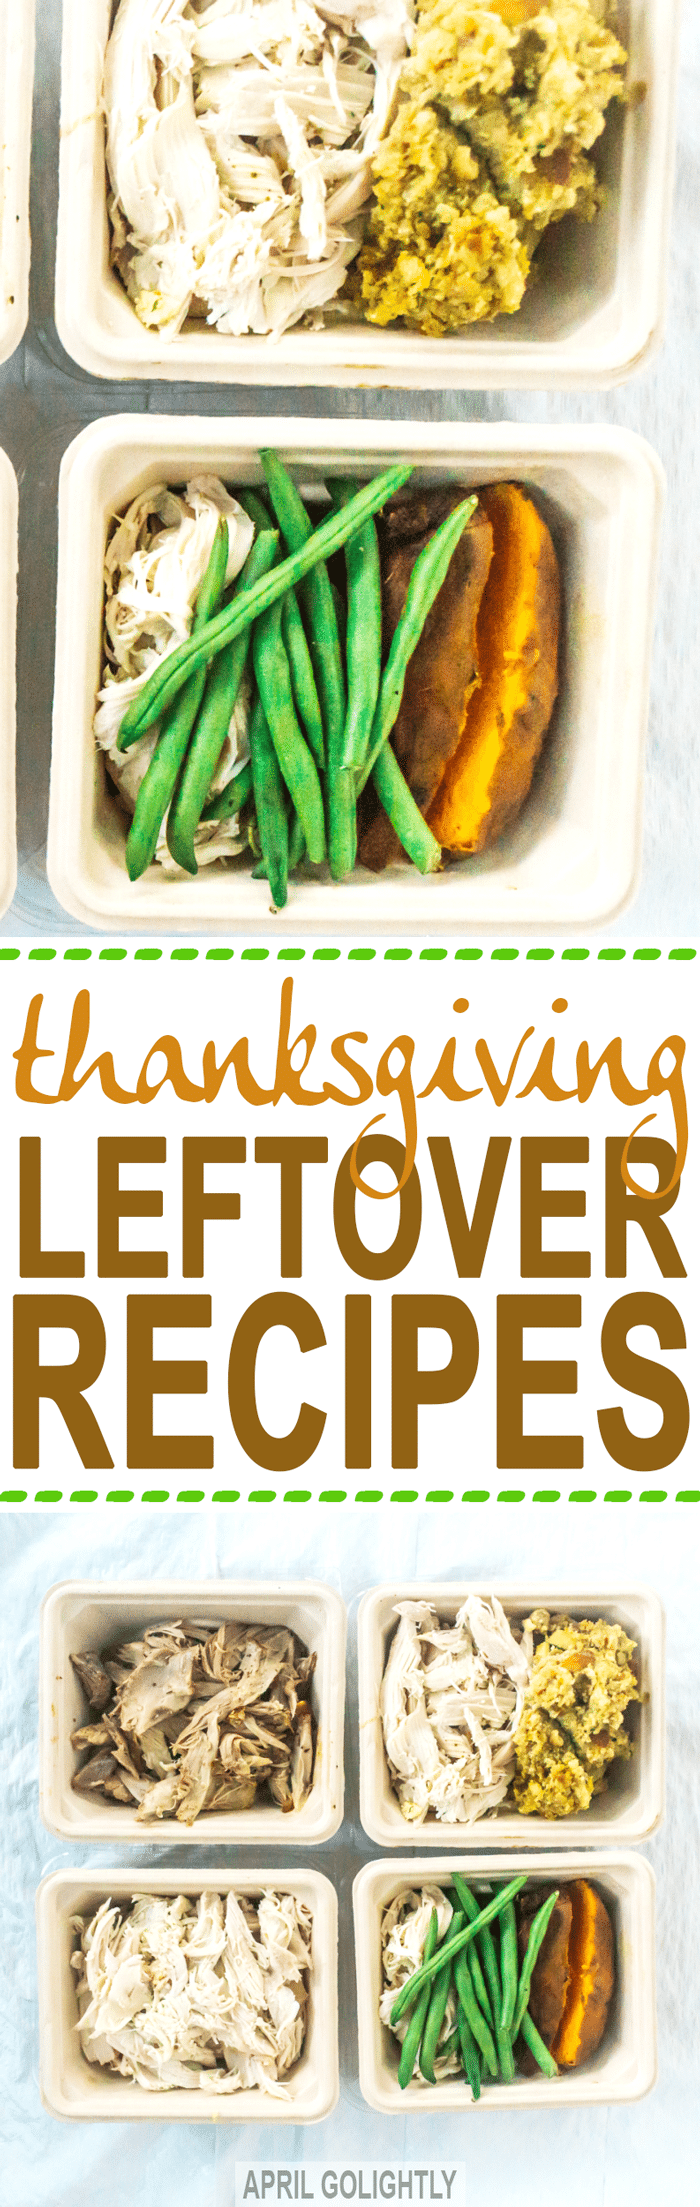 Easy Thanksgiving Leftover Recipe Ideas - what to do with left over turkey, cranberry sauce, gravy, stuffing, carrots, sweet potatoes after thanksgiving day